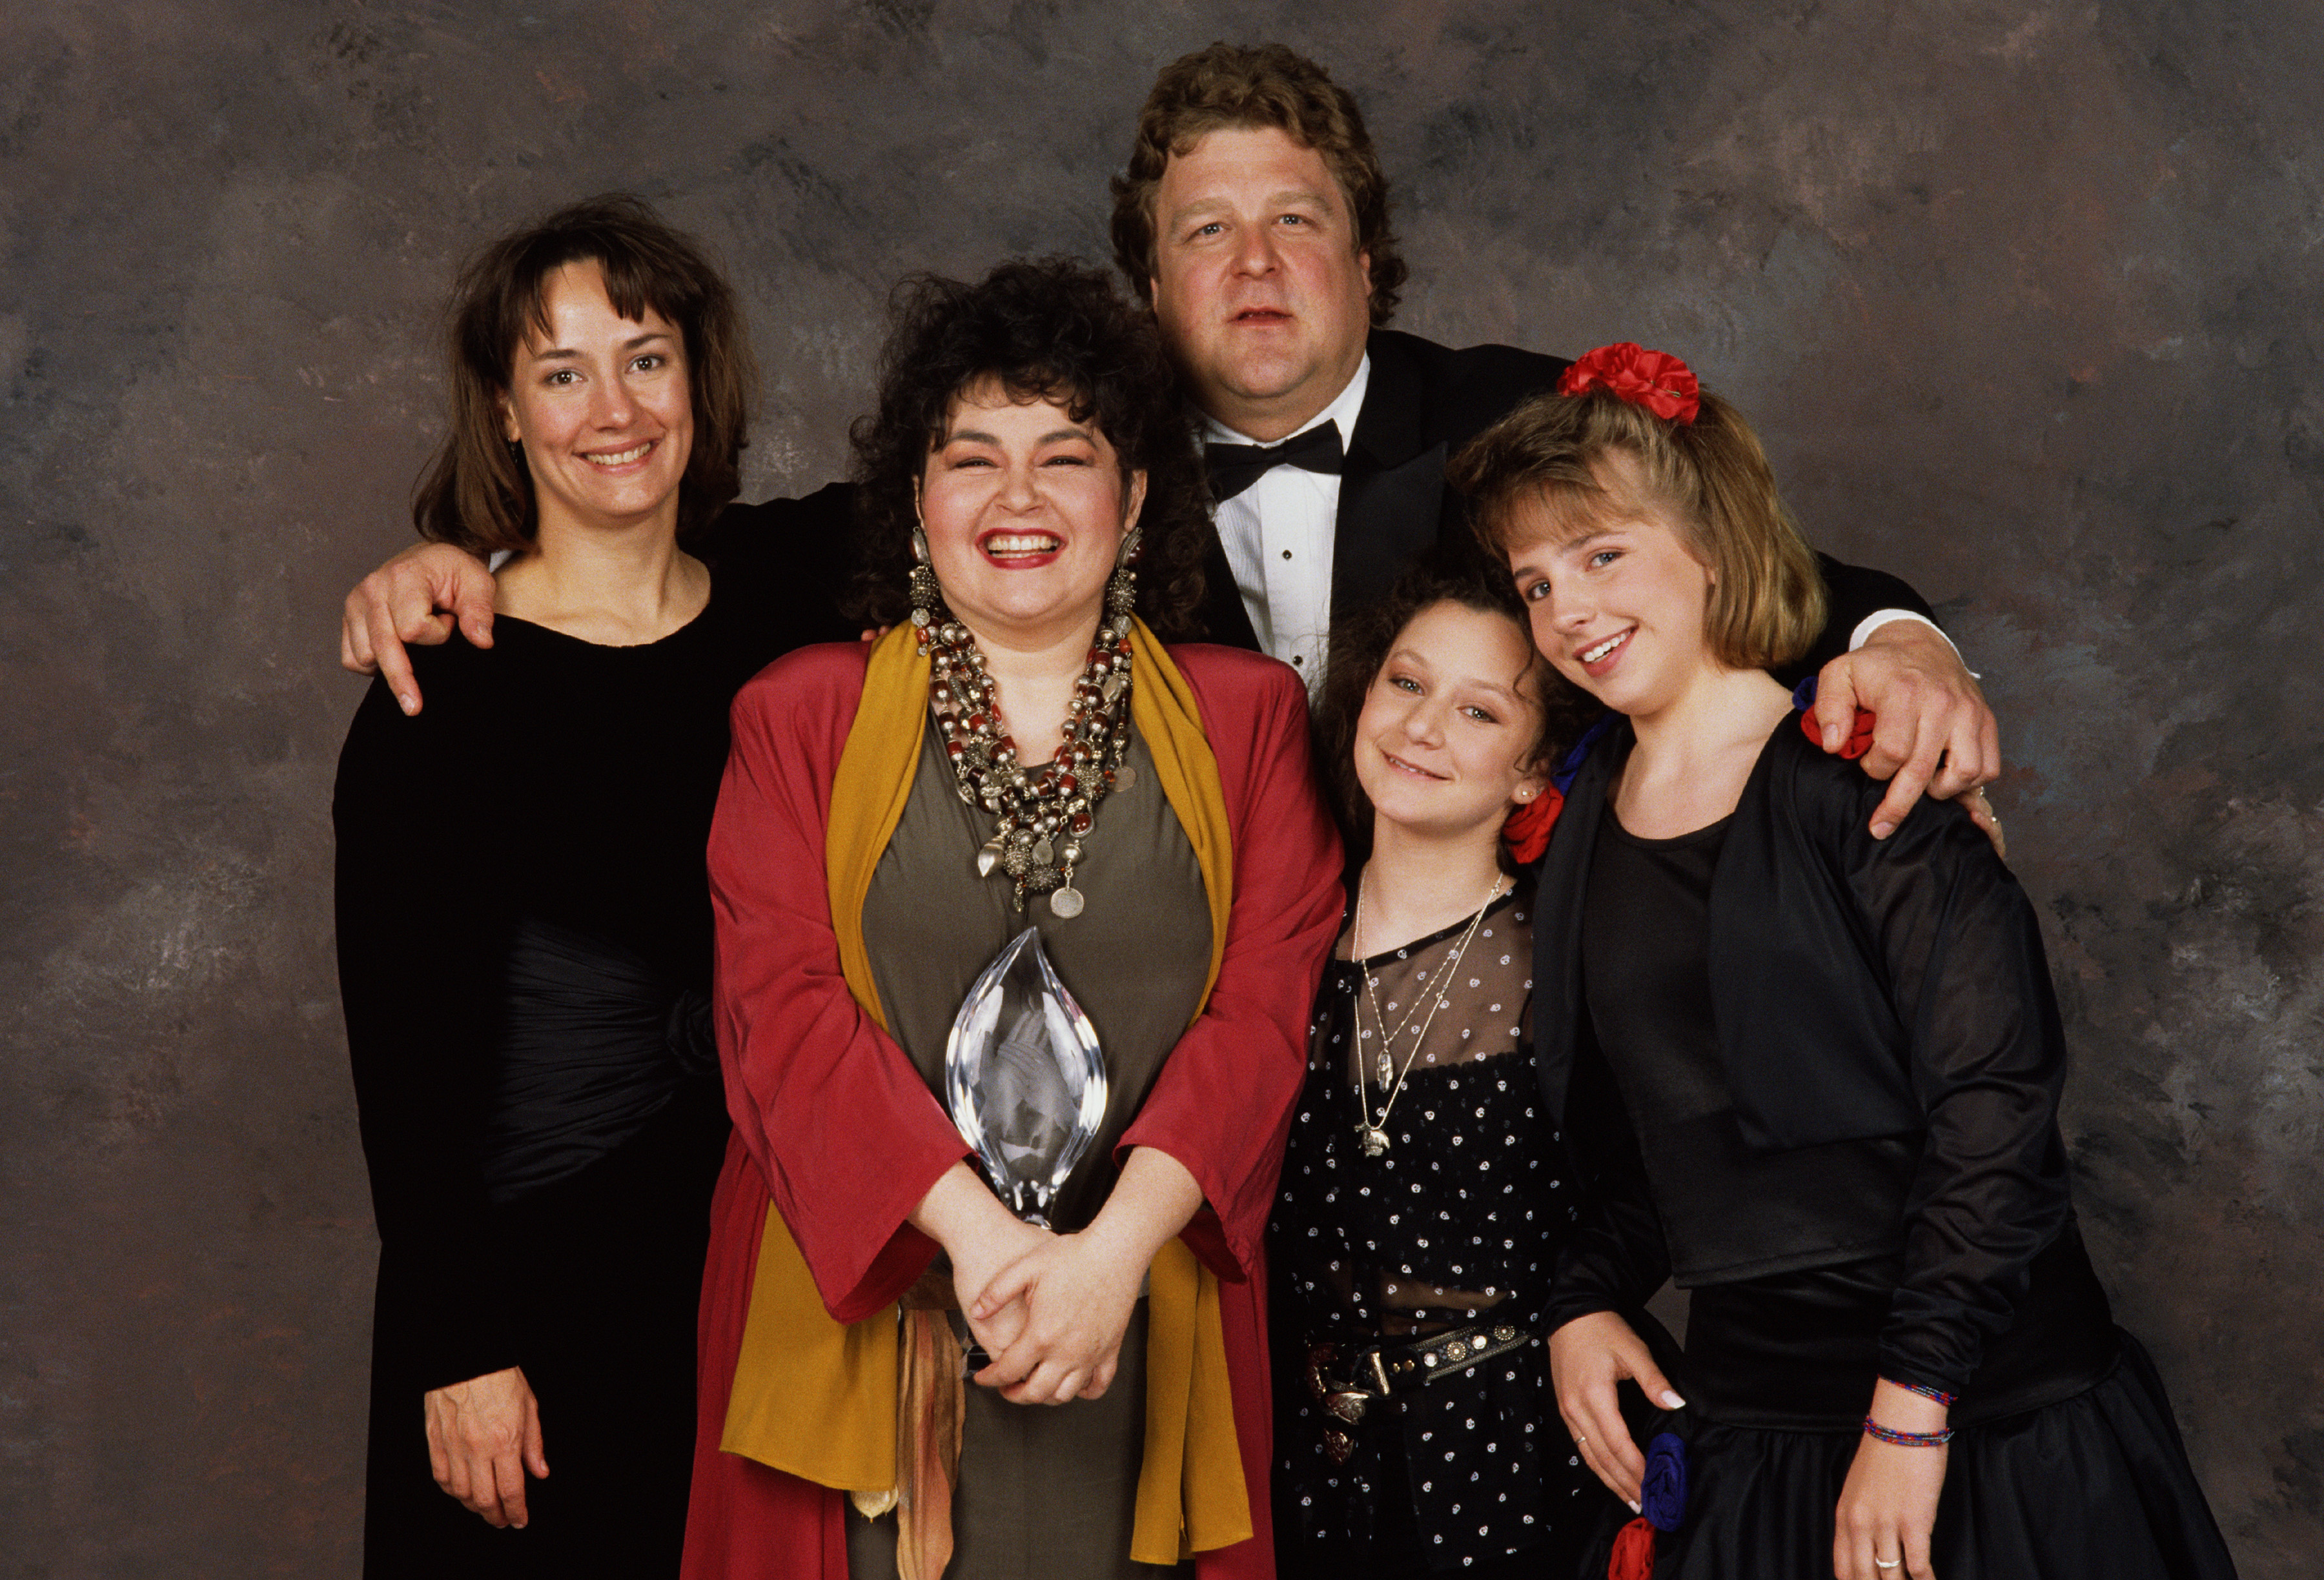 The cast of "Roseanne:" Laurie Metcalf, Roseanne Barr, John Goodman, Sara Gilbert, and Lecy Goranson, pose backstage in Beverly Hills, California, after winning the 1989 People's Choice Award for the Best TV Comedy | Source: Getty Images